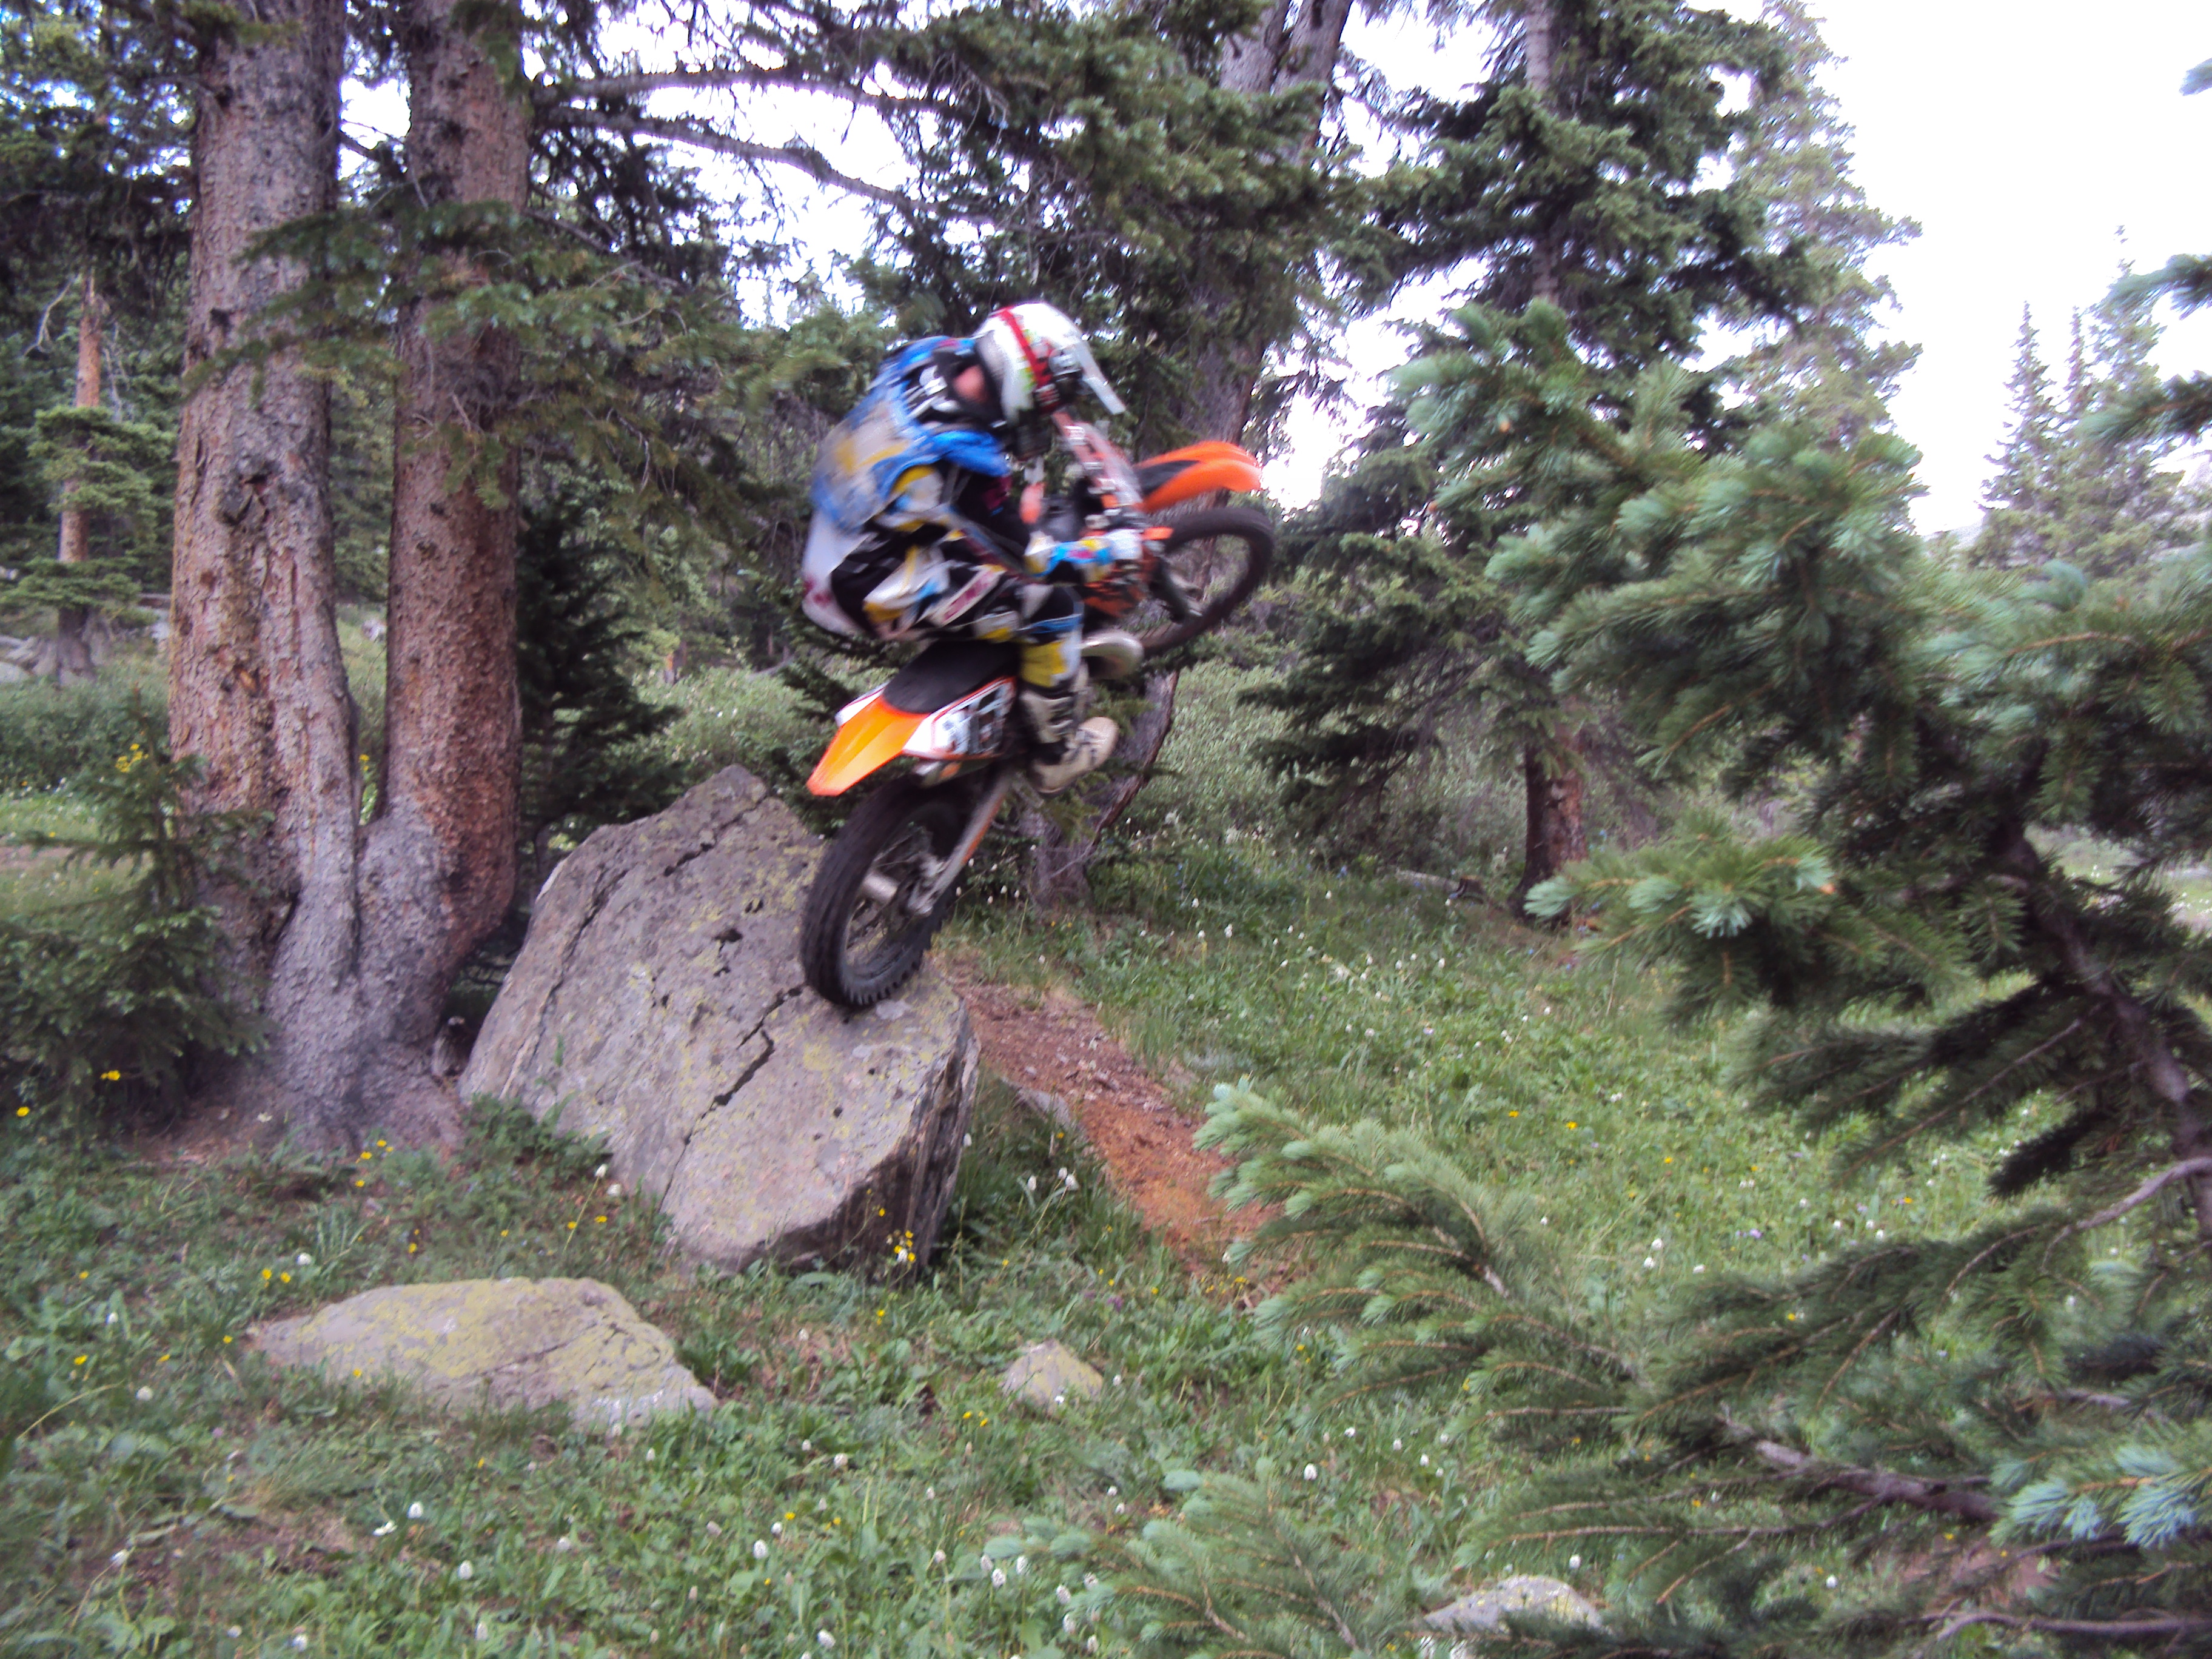 Phil always seems to forget the KTM isnt a trials bike